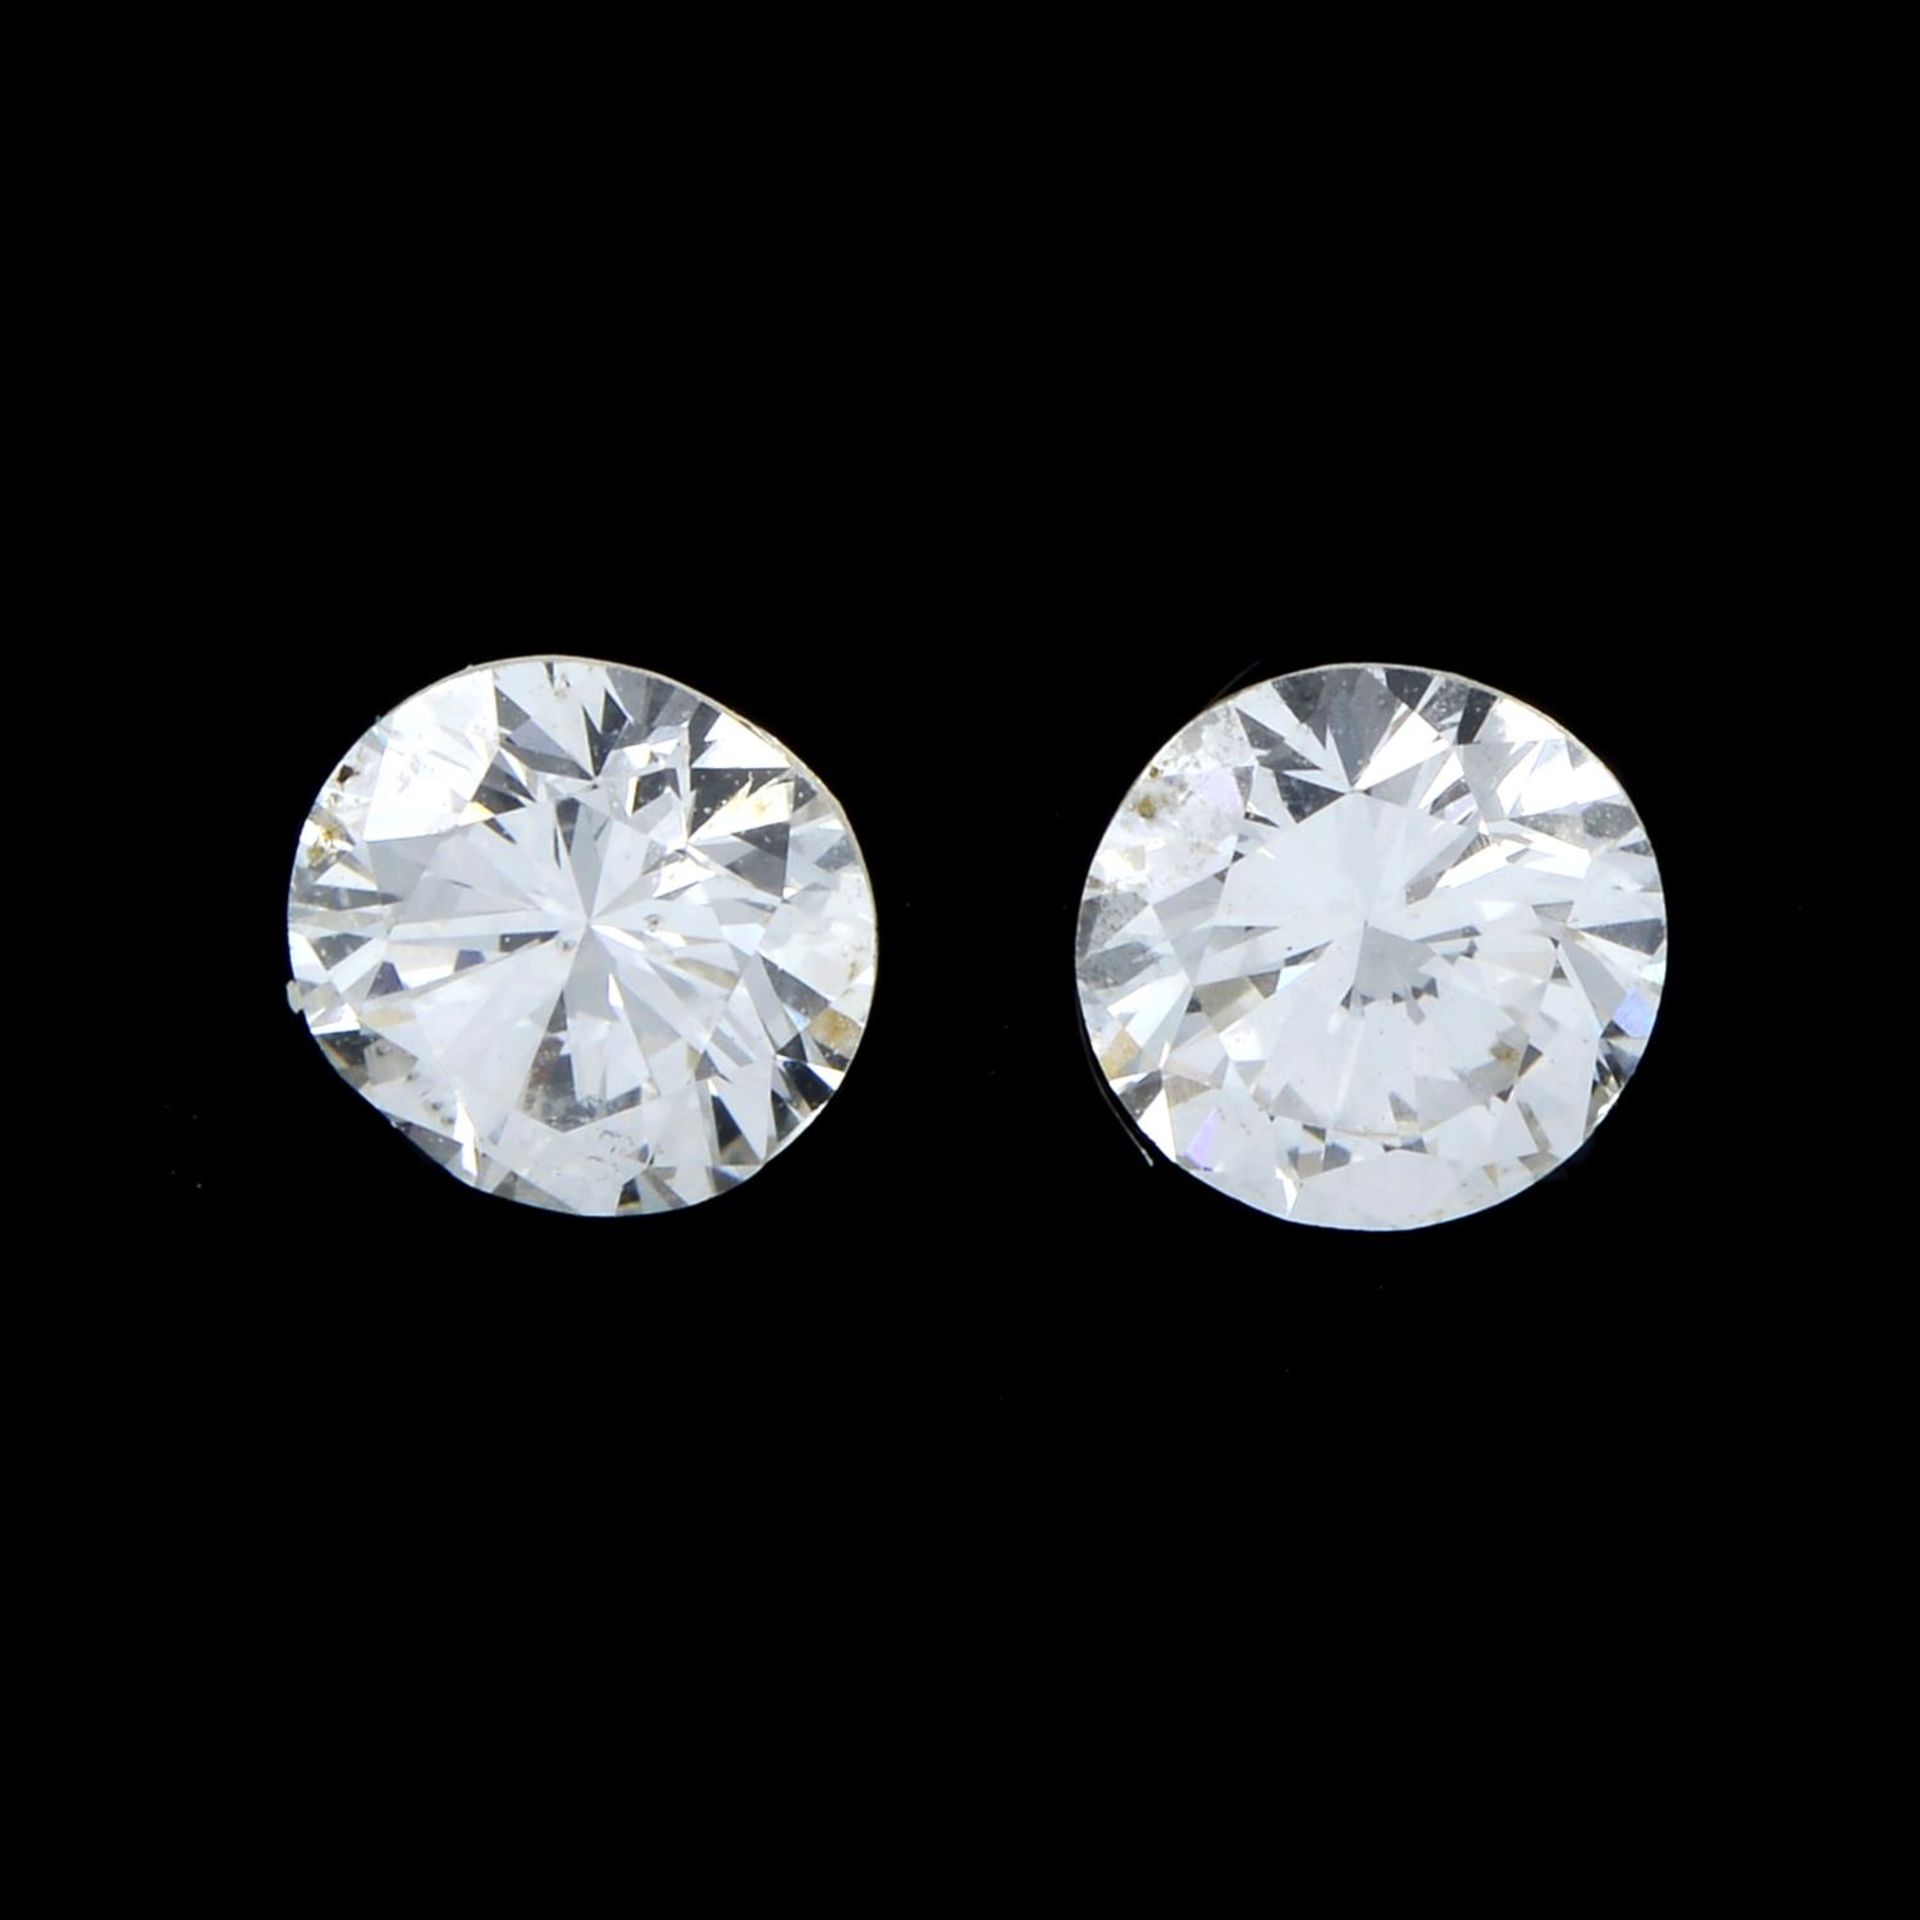 Pair of brilliant cut diamonds weighing 0.66ct. Diamonds estimated to be H colour and VS2 clarity.